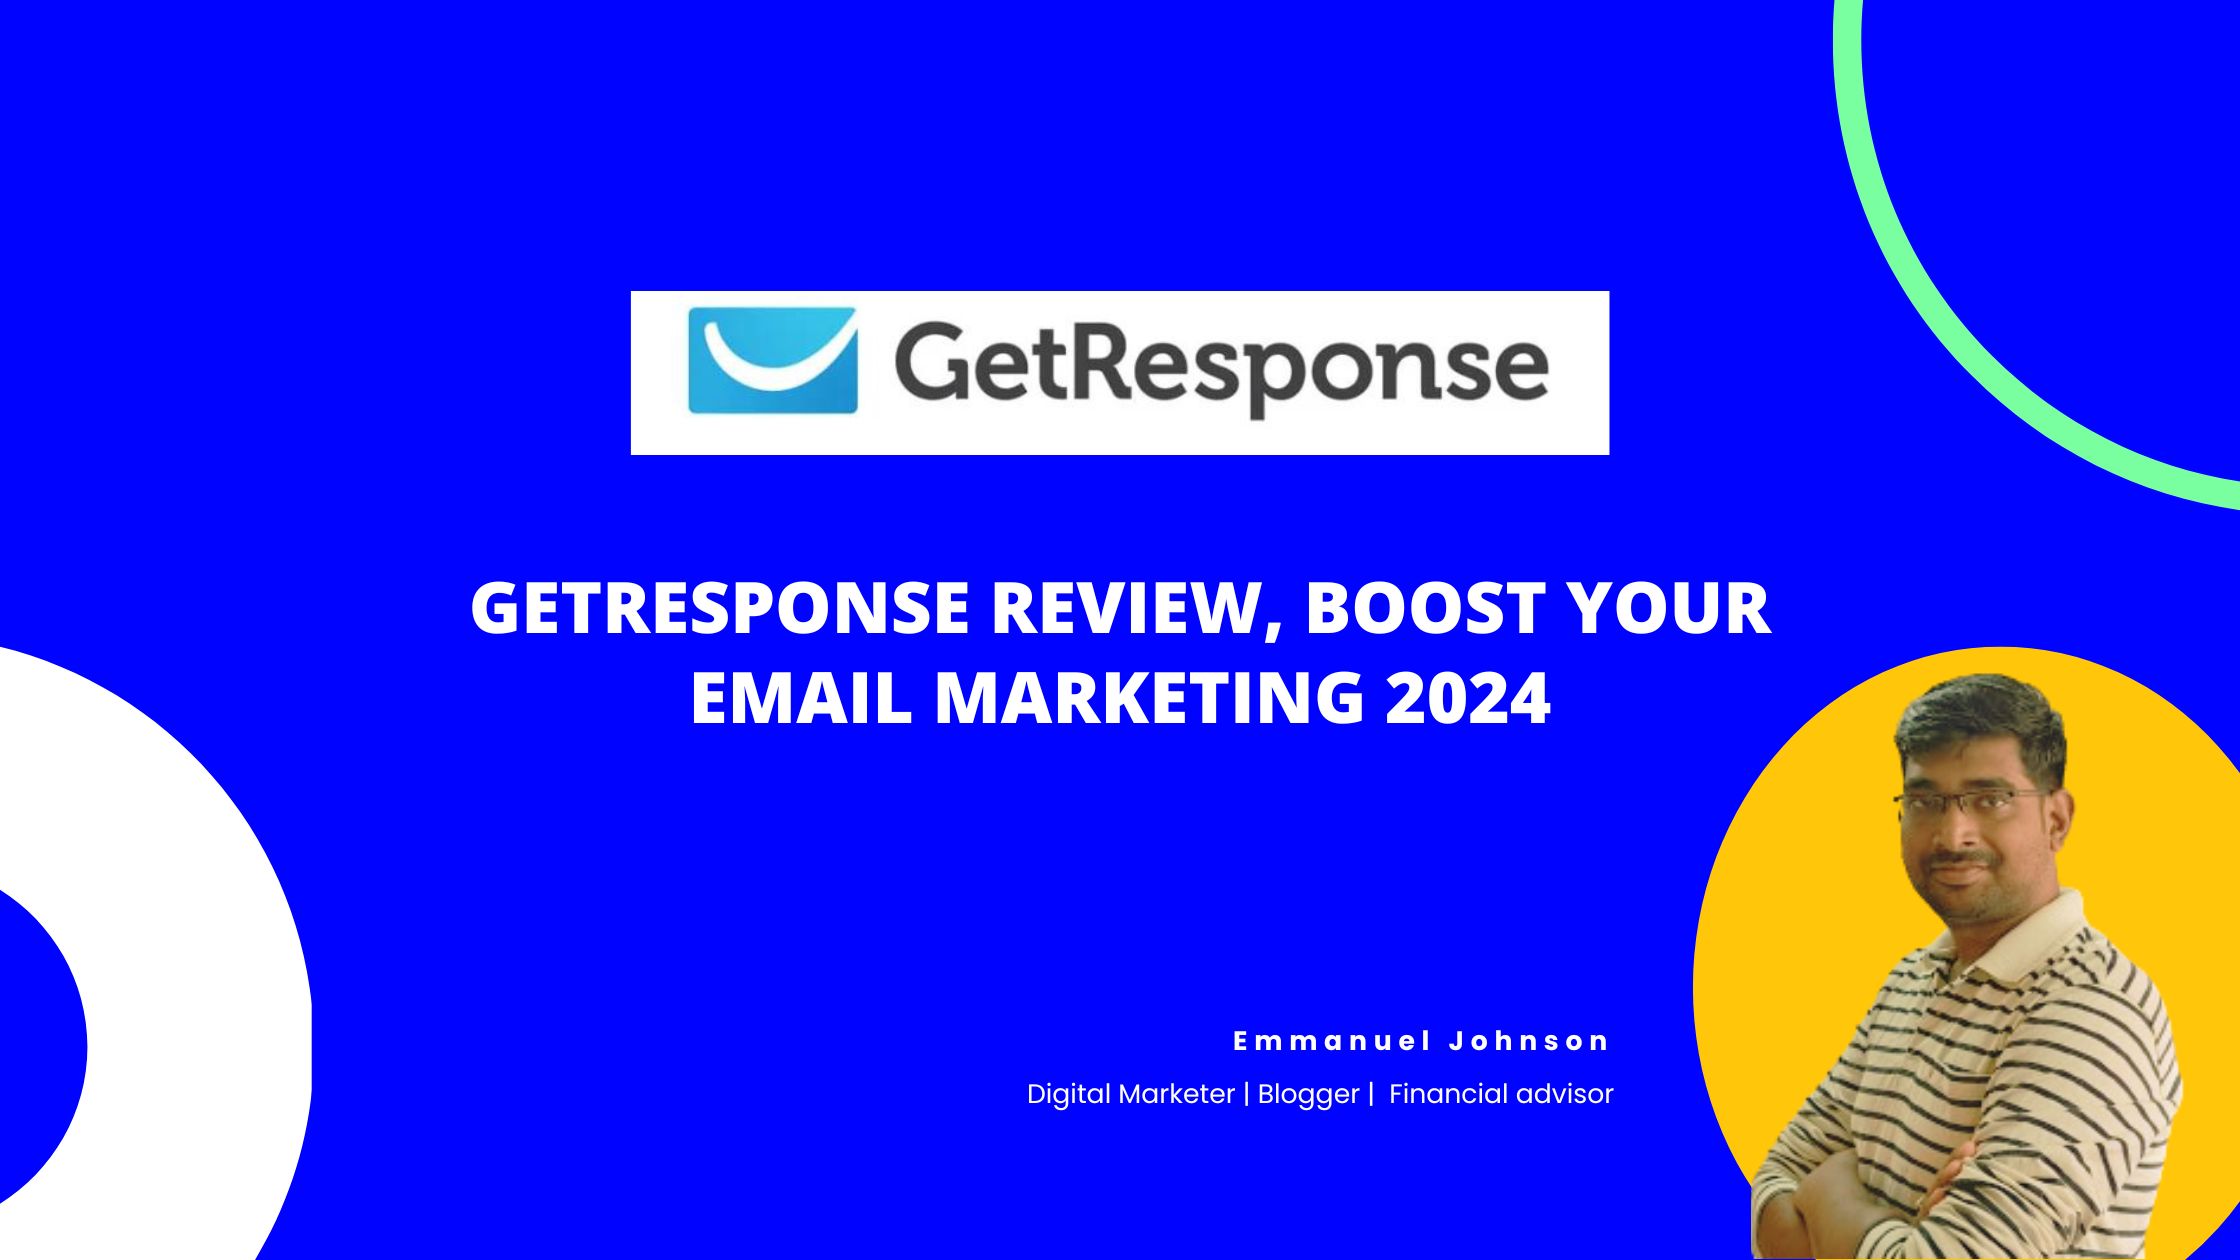 GetResponse Best Review, Boost Your Email Marketing 2024